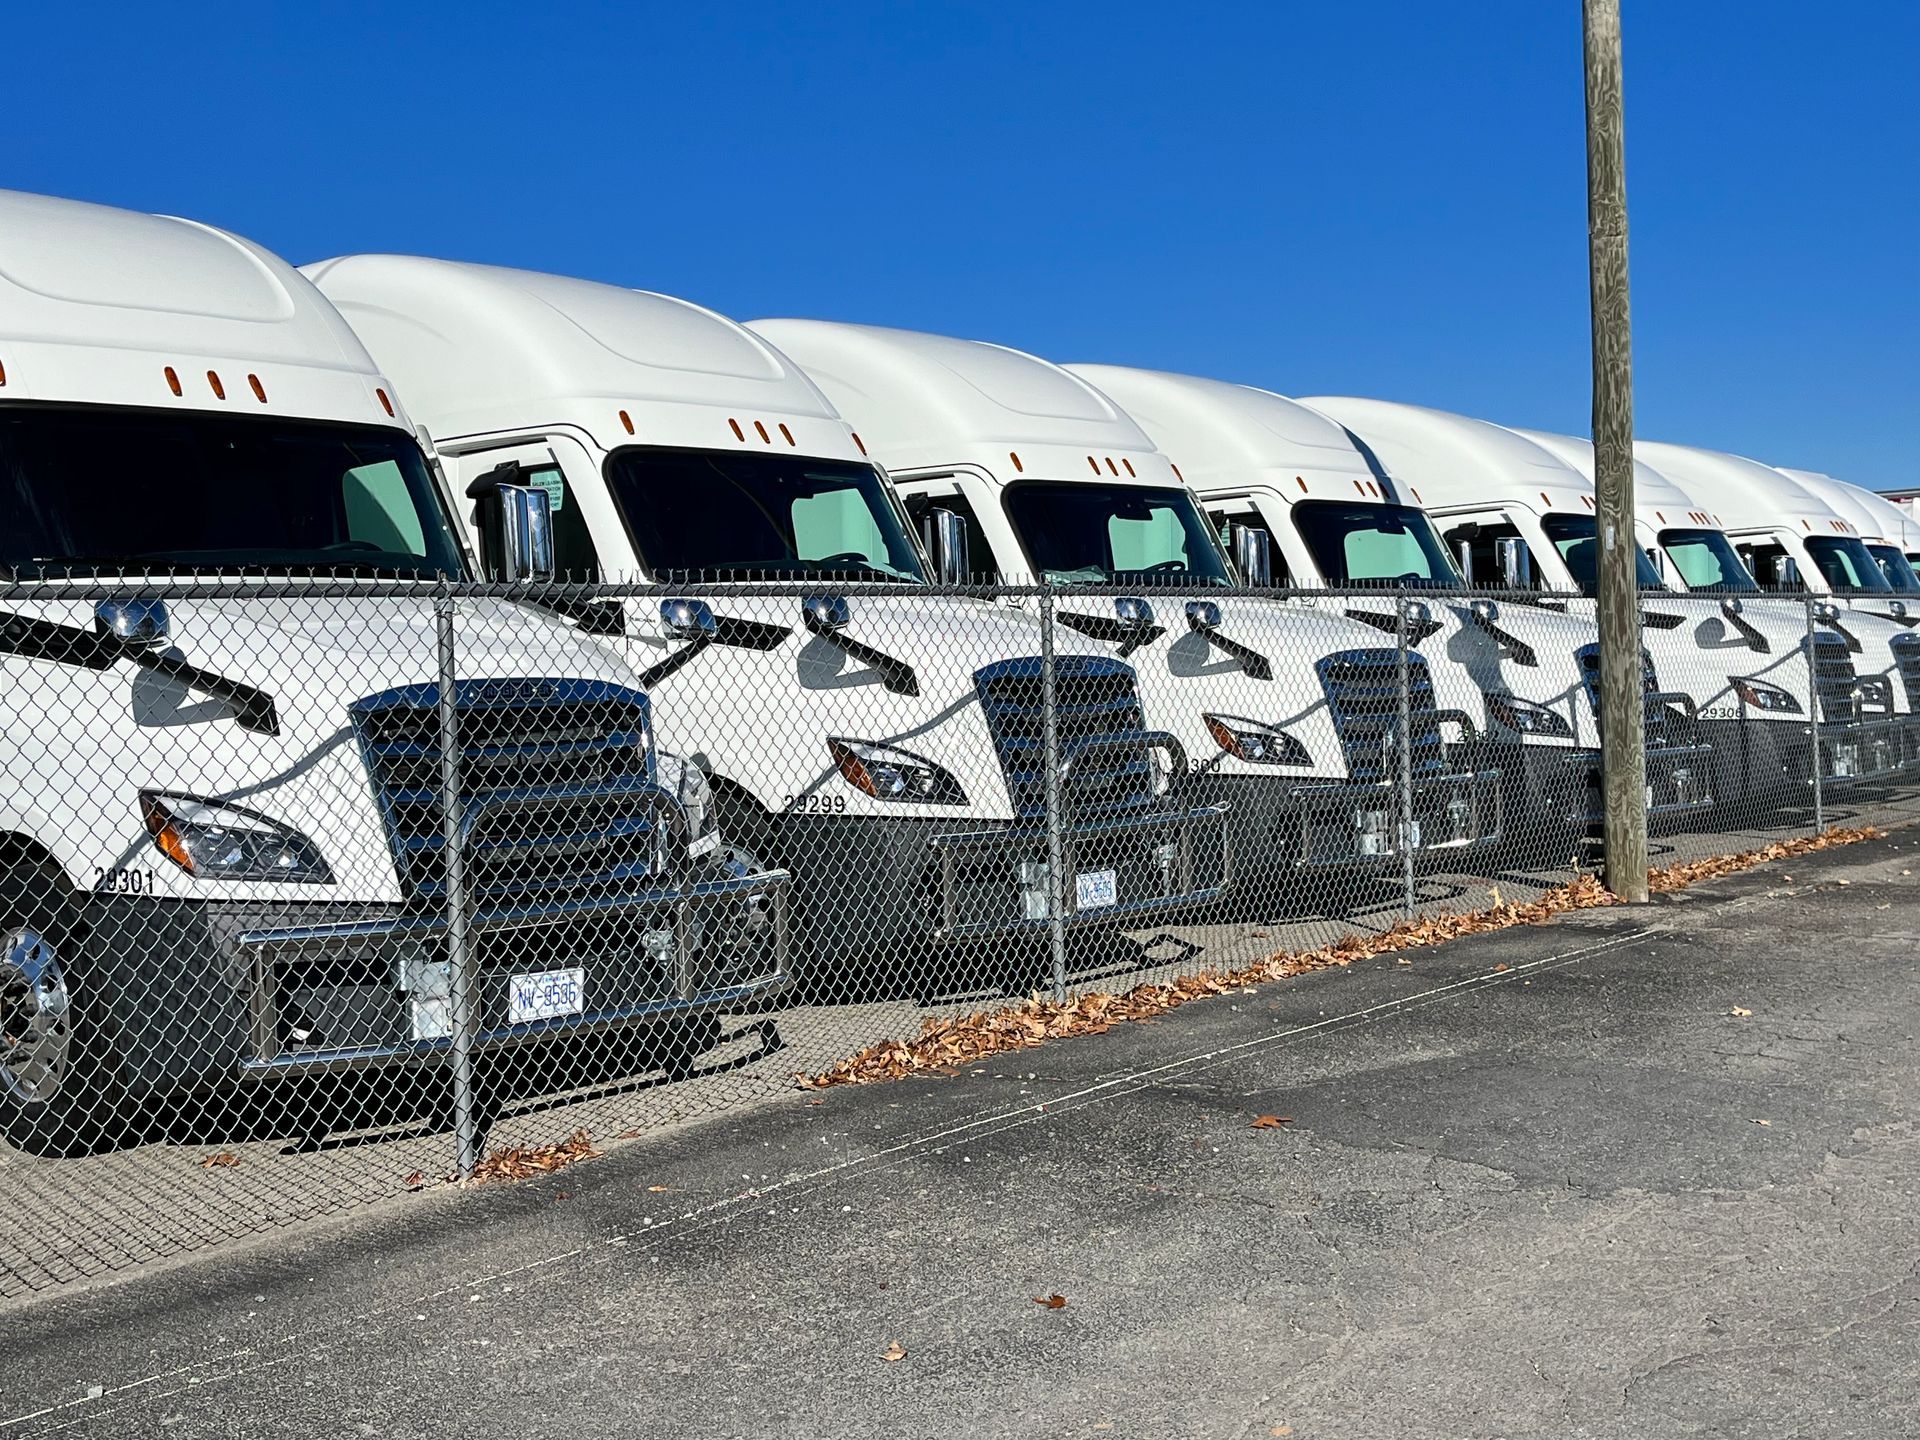 a row of Salem leasing semi trucks parked next to a chain link fence.